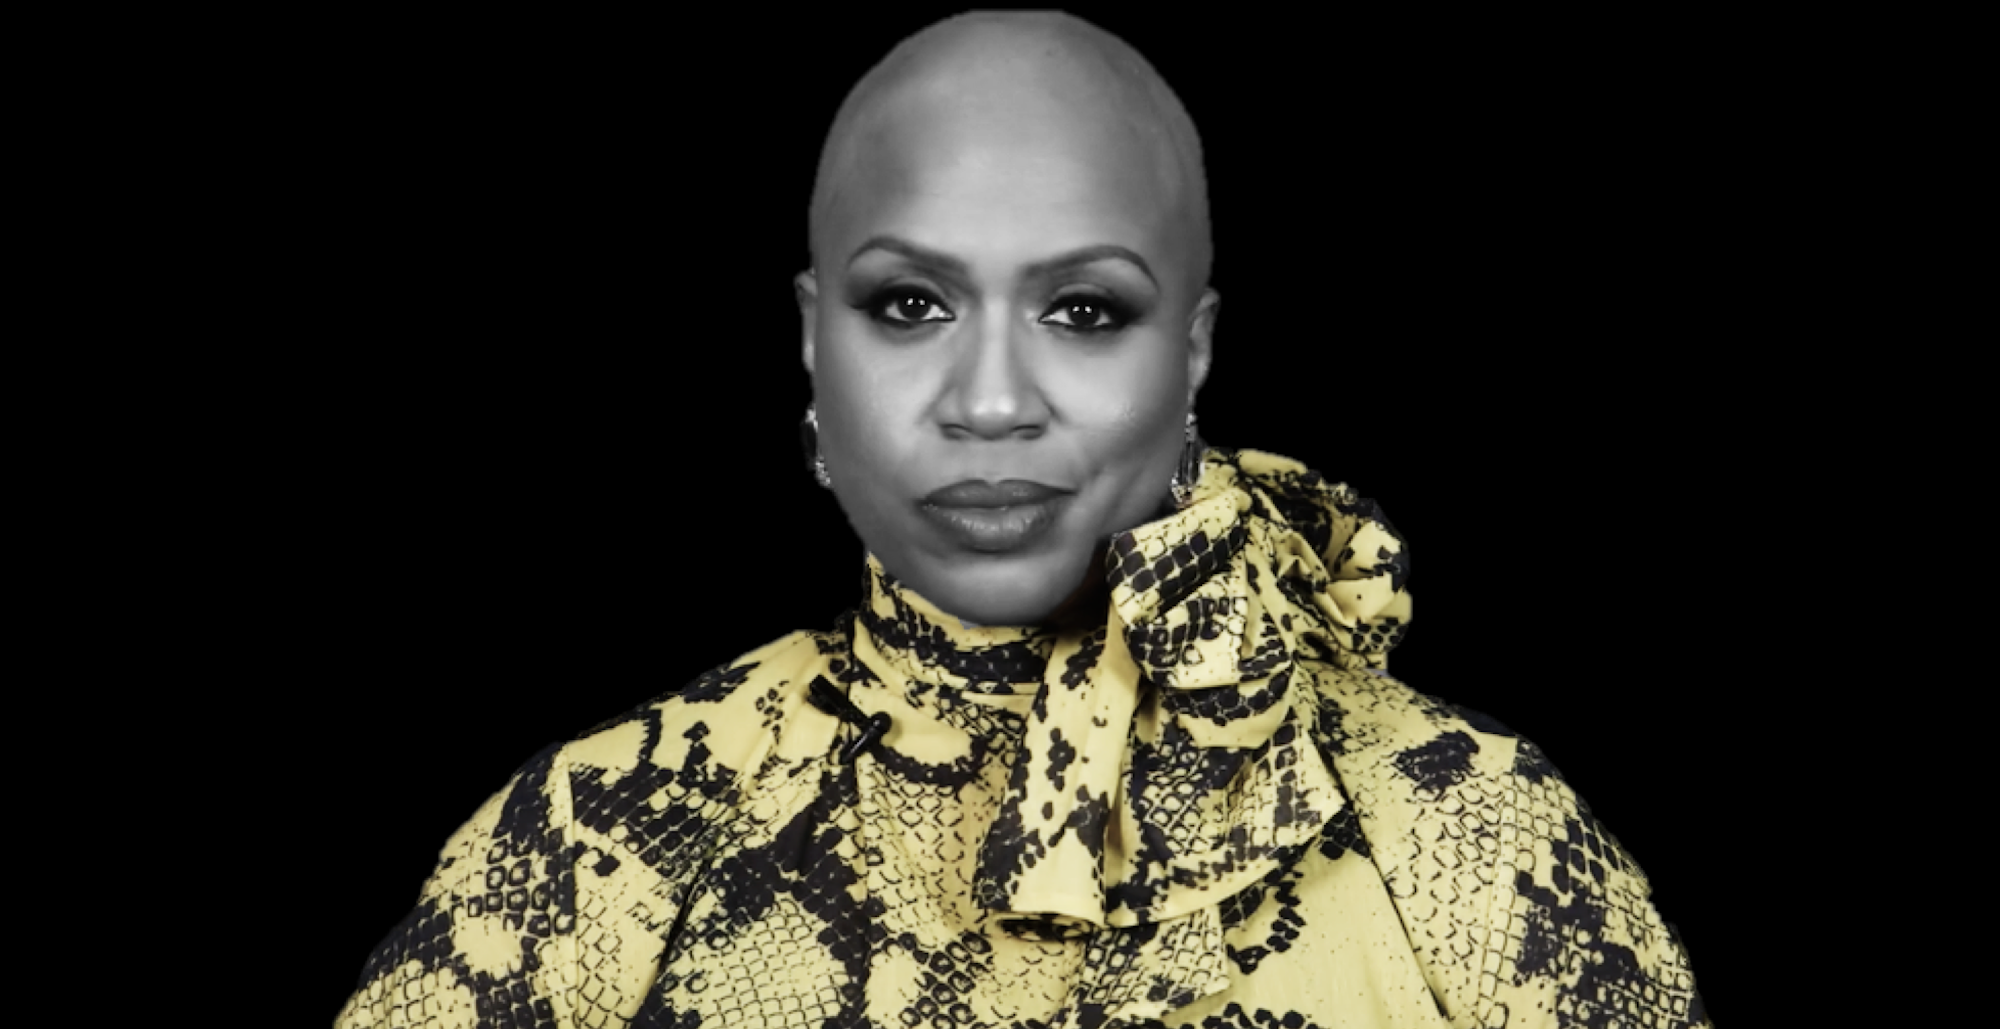 Exclusive: Rep. Ayanna Pressley Reveals Beautiful Bald Head and Discusses Alopecia for the First Time | The Root